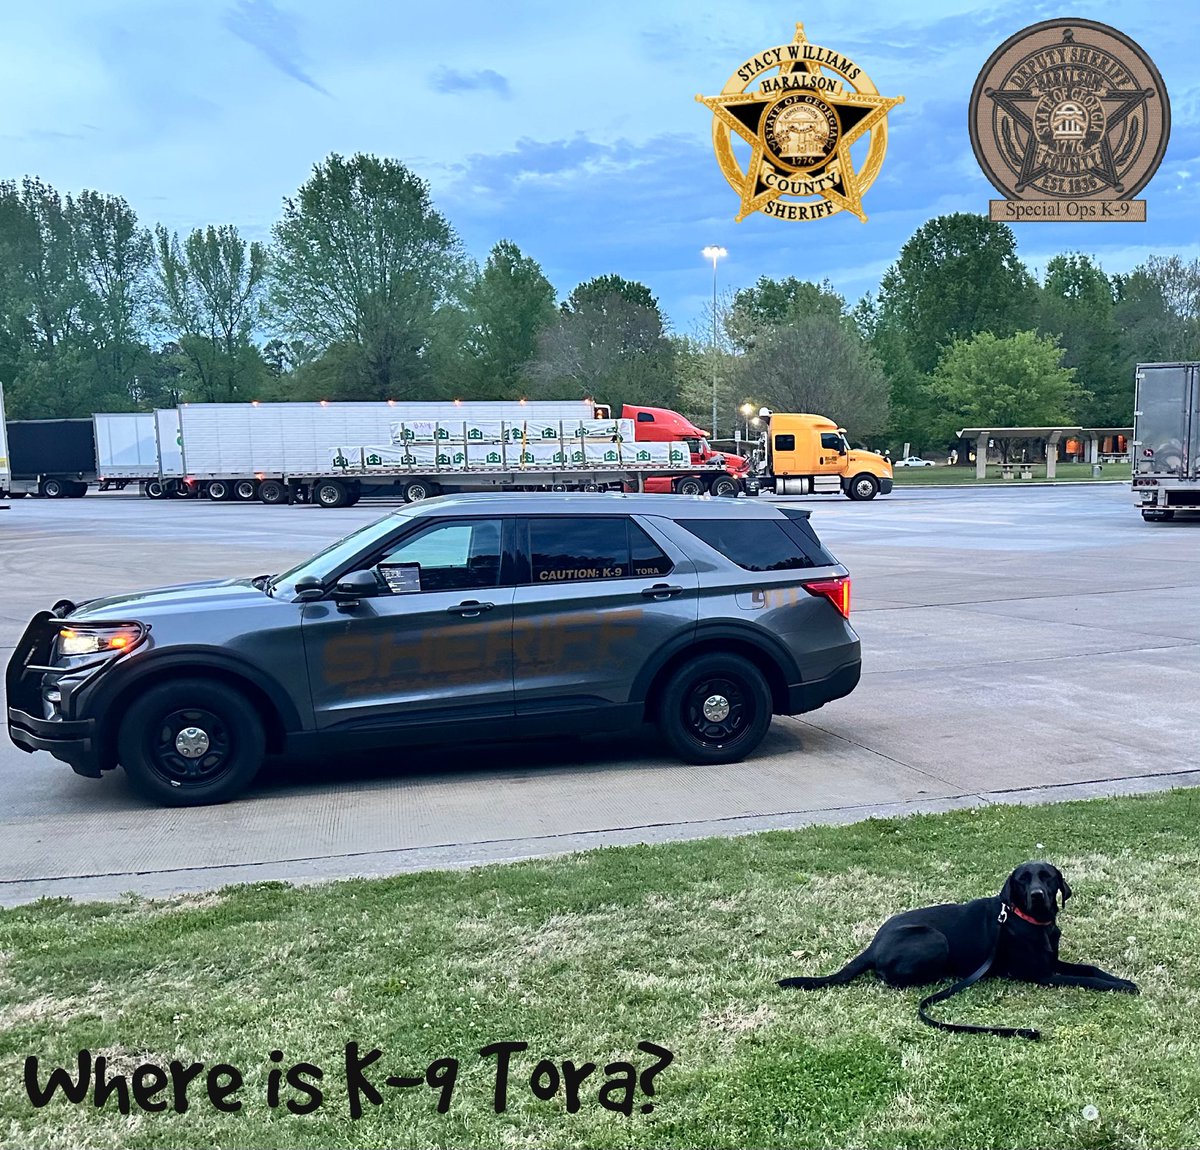 It’s time for everyone’s favorite contest, Where is K-9 Tora Wednesday! Last week was a harder one, so this week Sgt. Kirkland decided to make it a little easier. Correct answers go into a drawing for a K-9 Tora trading card. So y’all, where is K-9 Tora? #WhereIsK9Tora #HCSO